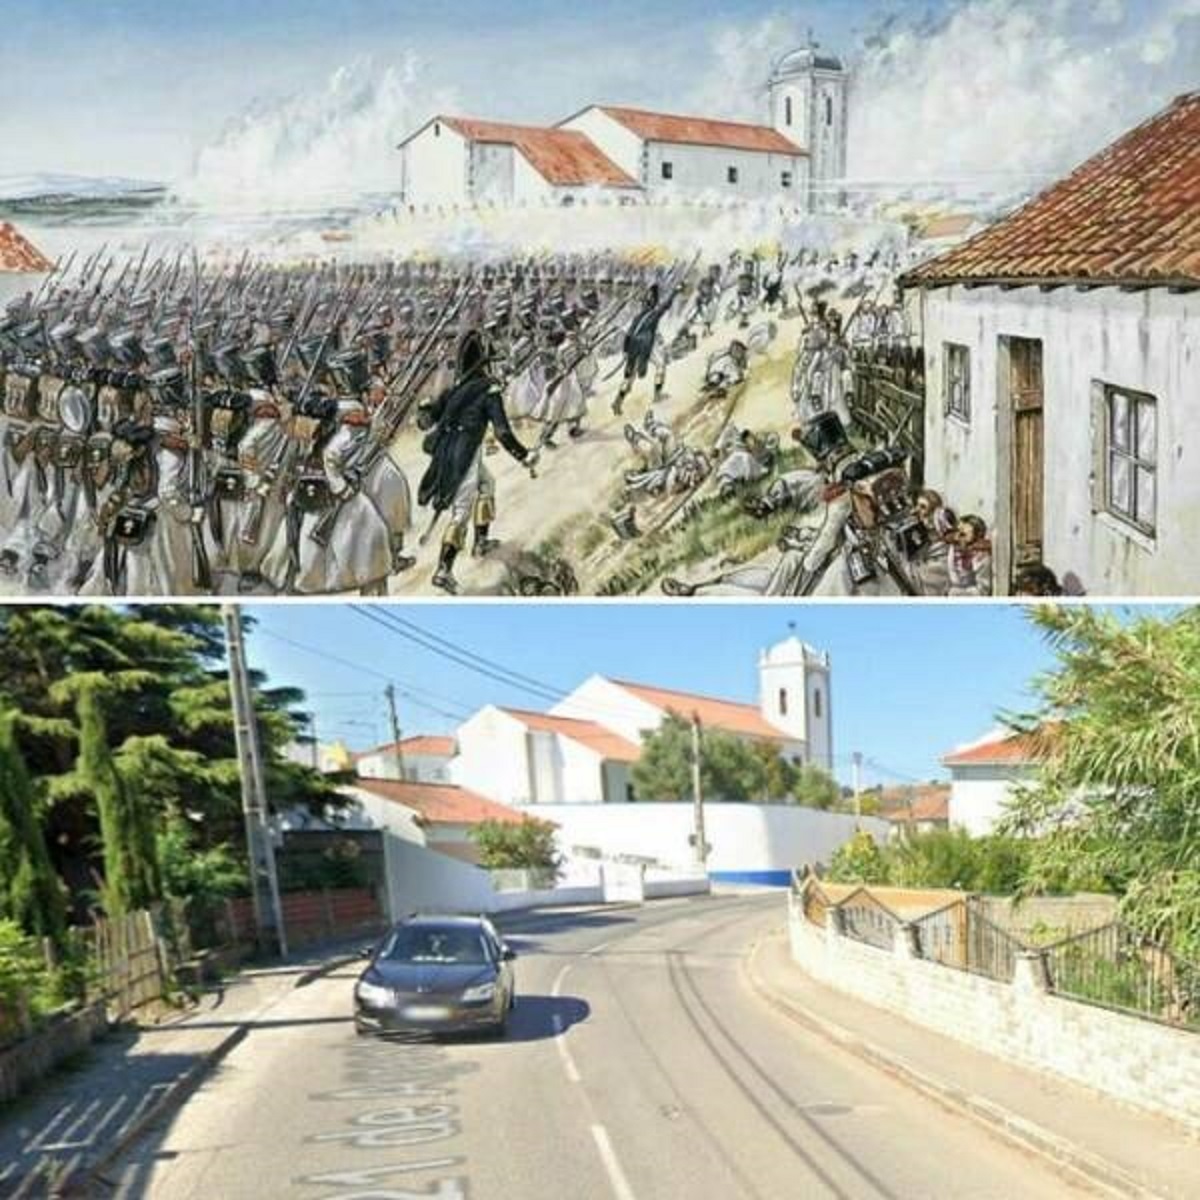 Battle Of Vimeiro (Portugal) 1808 By Patrice Courcelle… And Today"